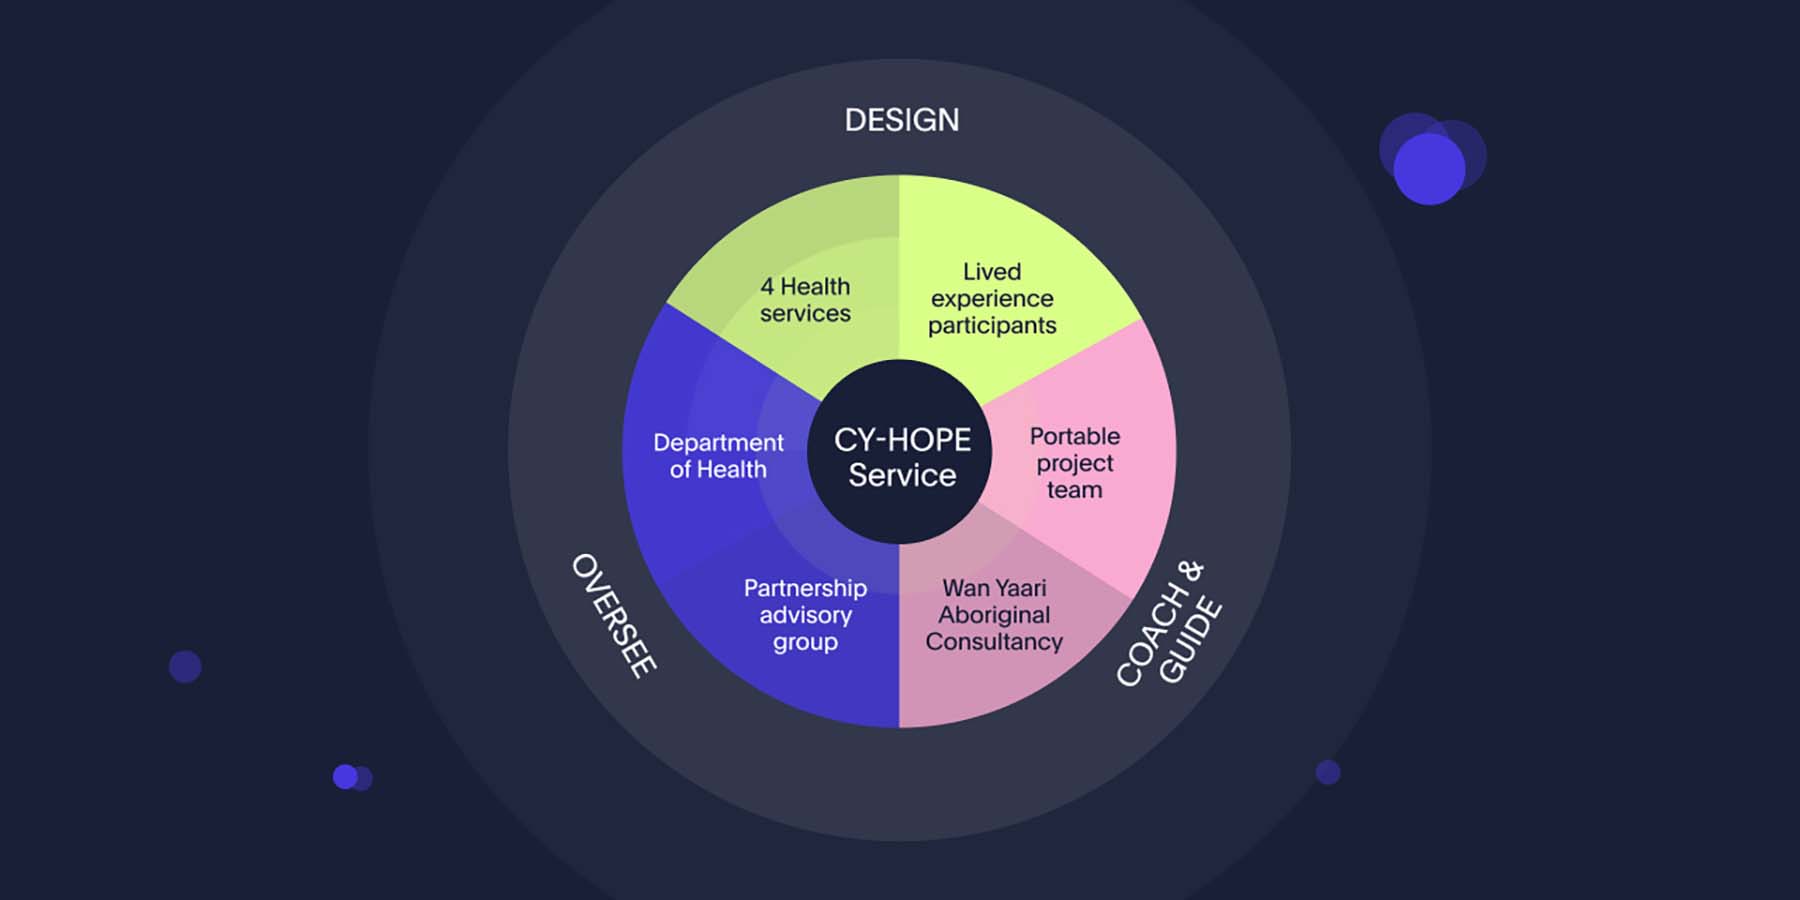 The wheel of relationship for this project between coaching, overseeing, and designing.